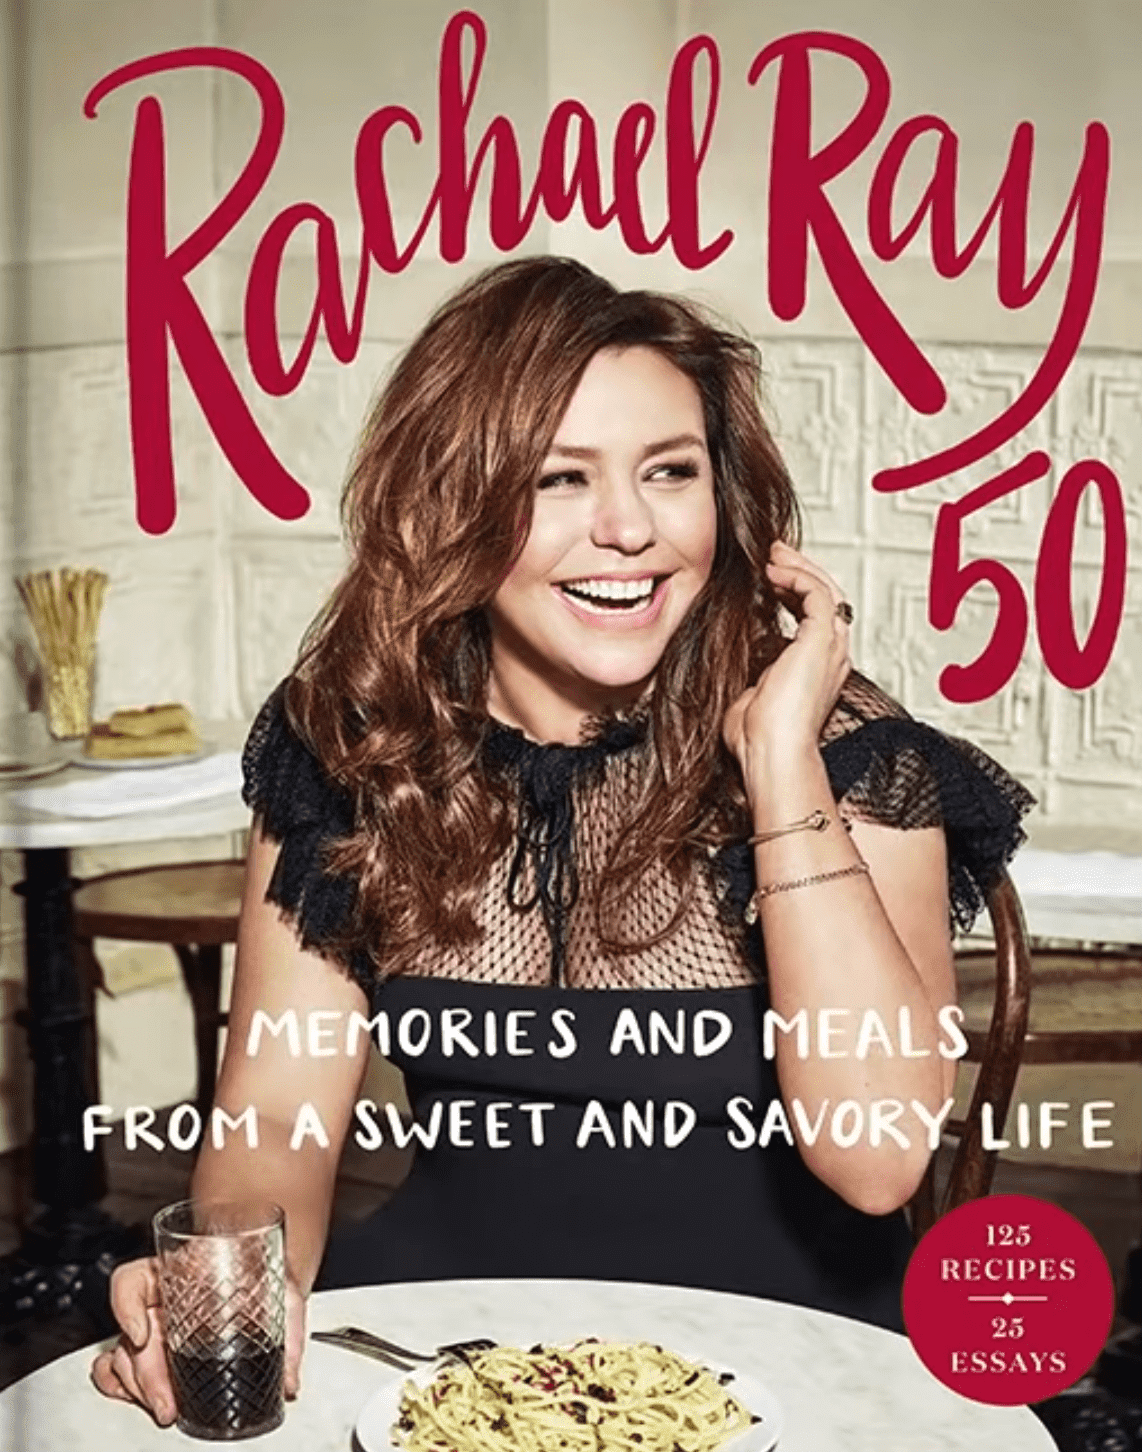 The cover of Rachael Ray's book "Rachael Ray 50." | Source: YouTube/TheView